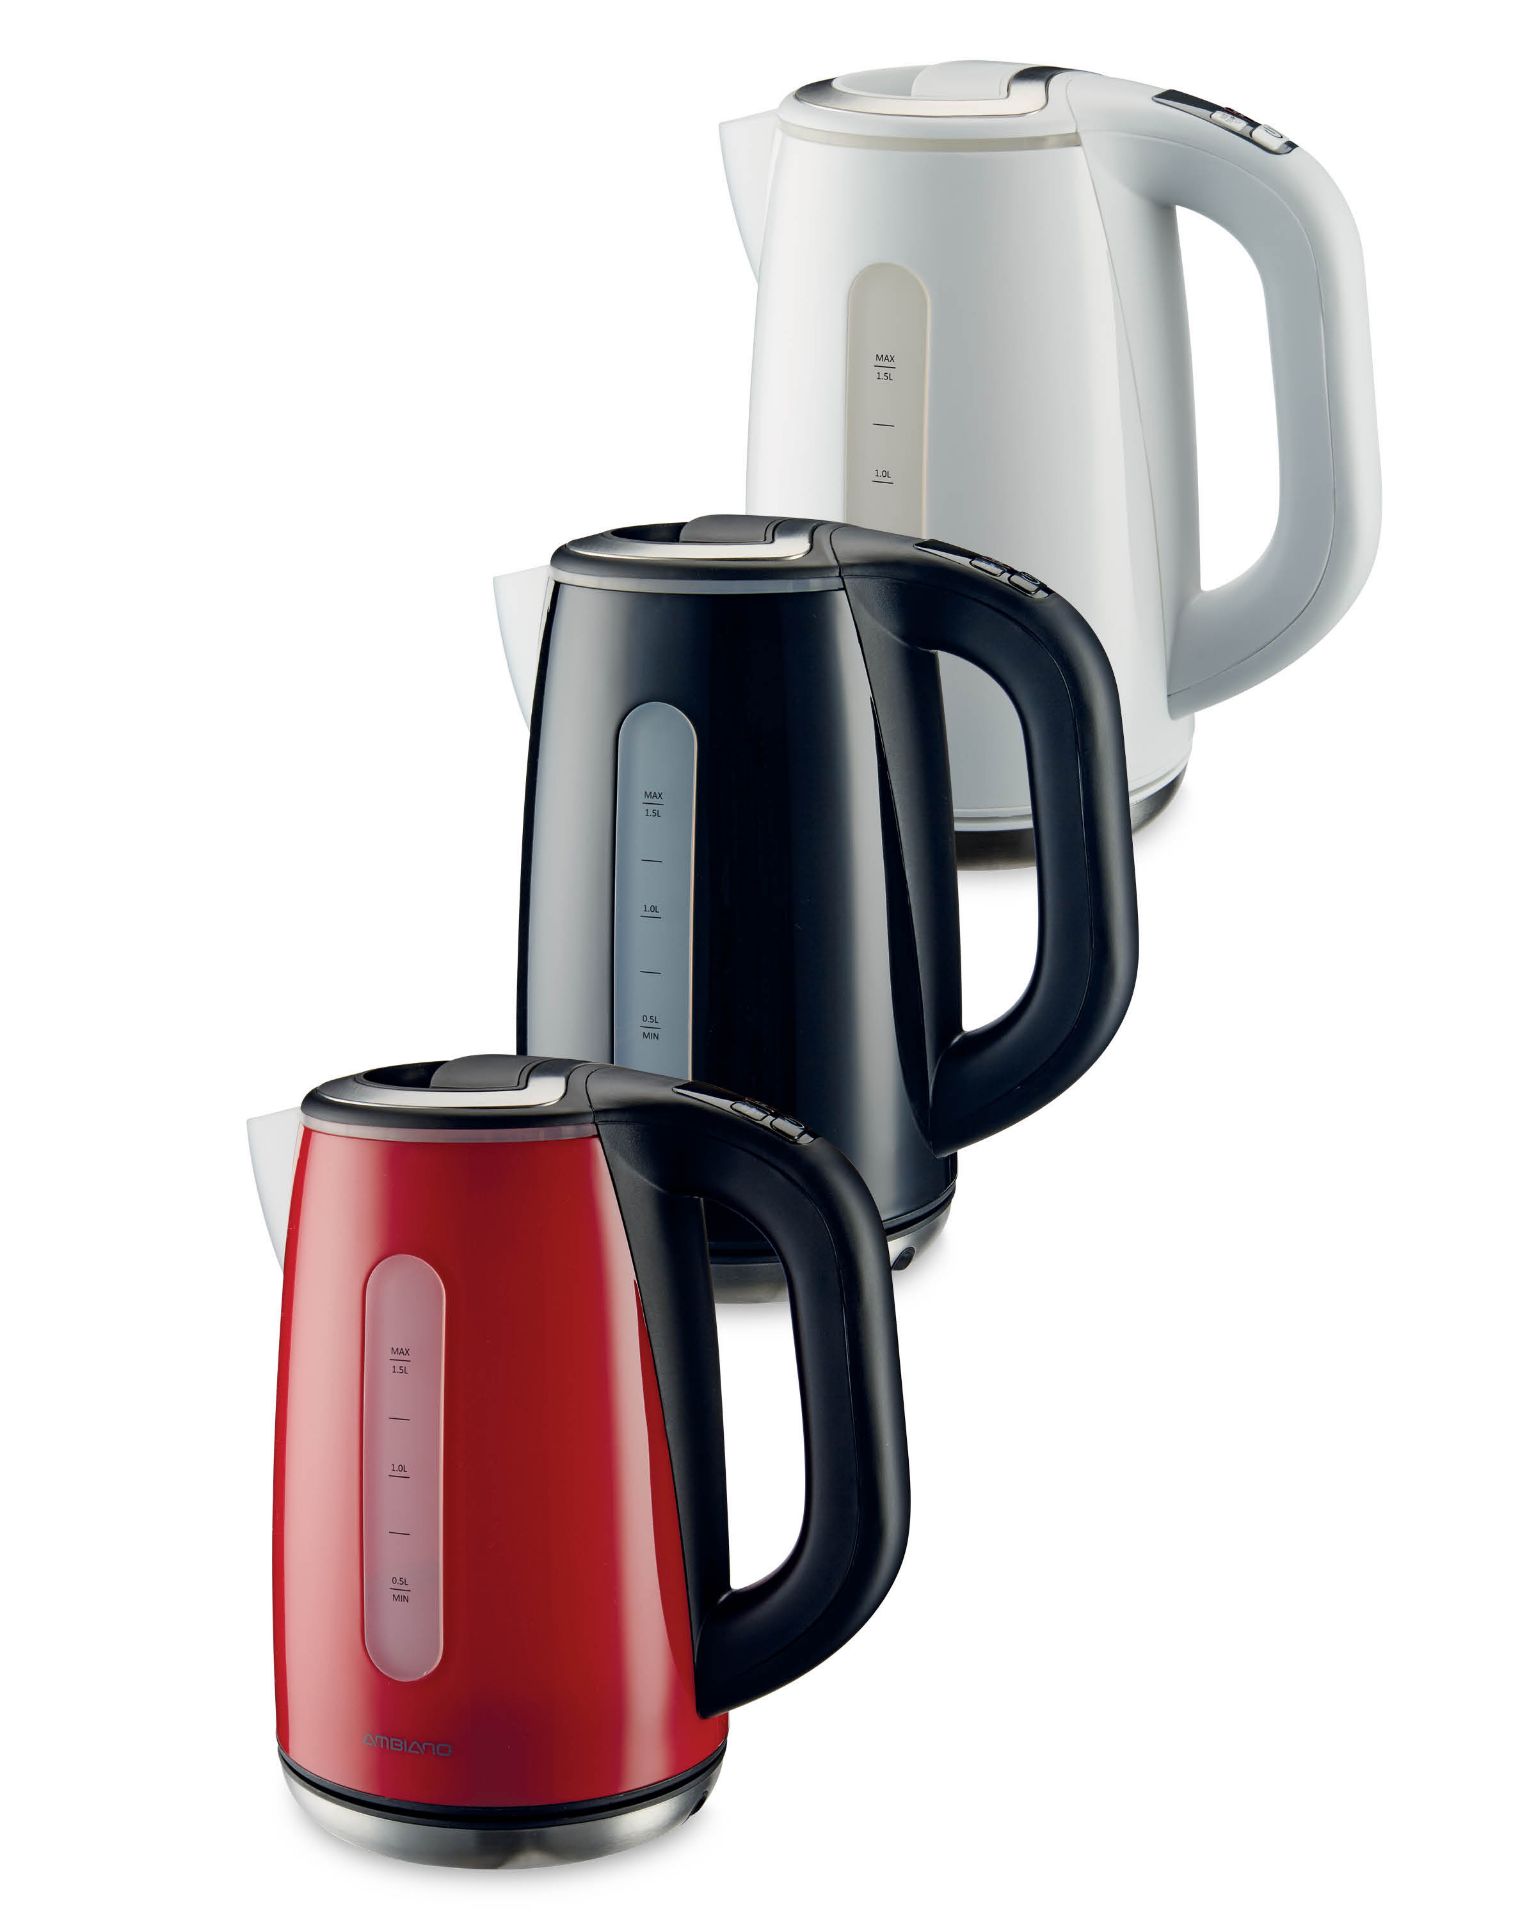 V Brand New Ambiano 2500-3000w 1.5 Litre Electronic Kettle X 2 YOUR BID PRICE TO BE MULTIPLIED BY